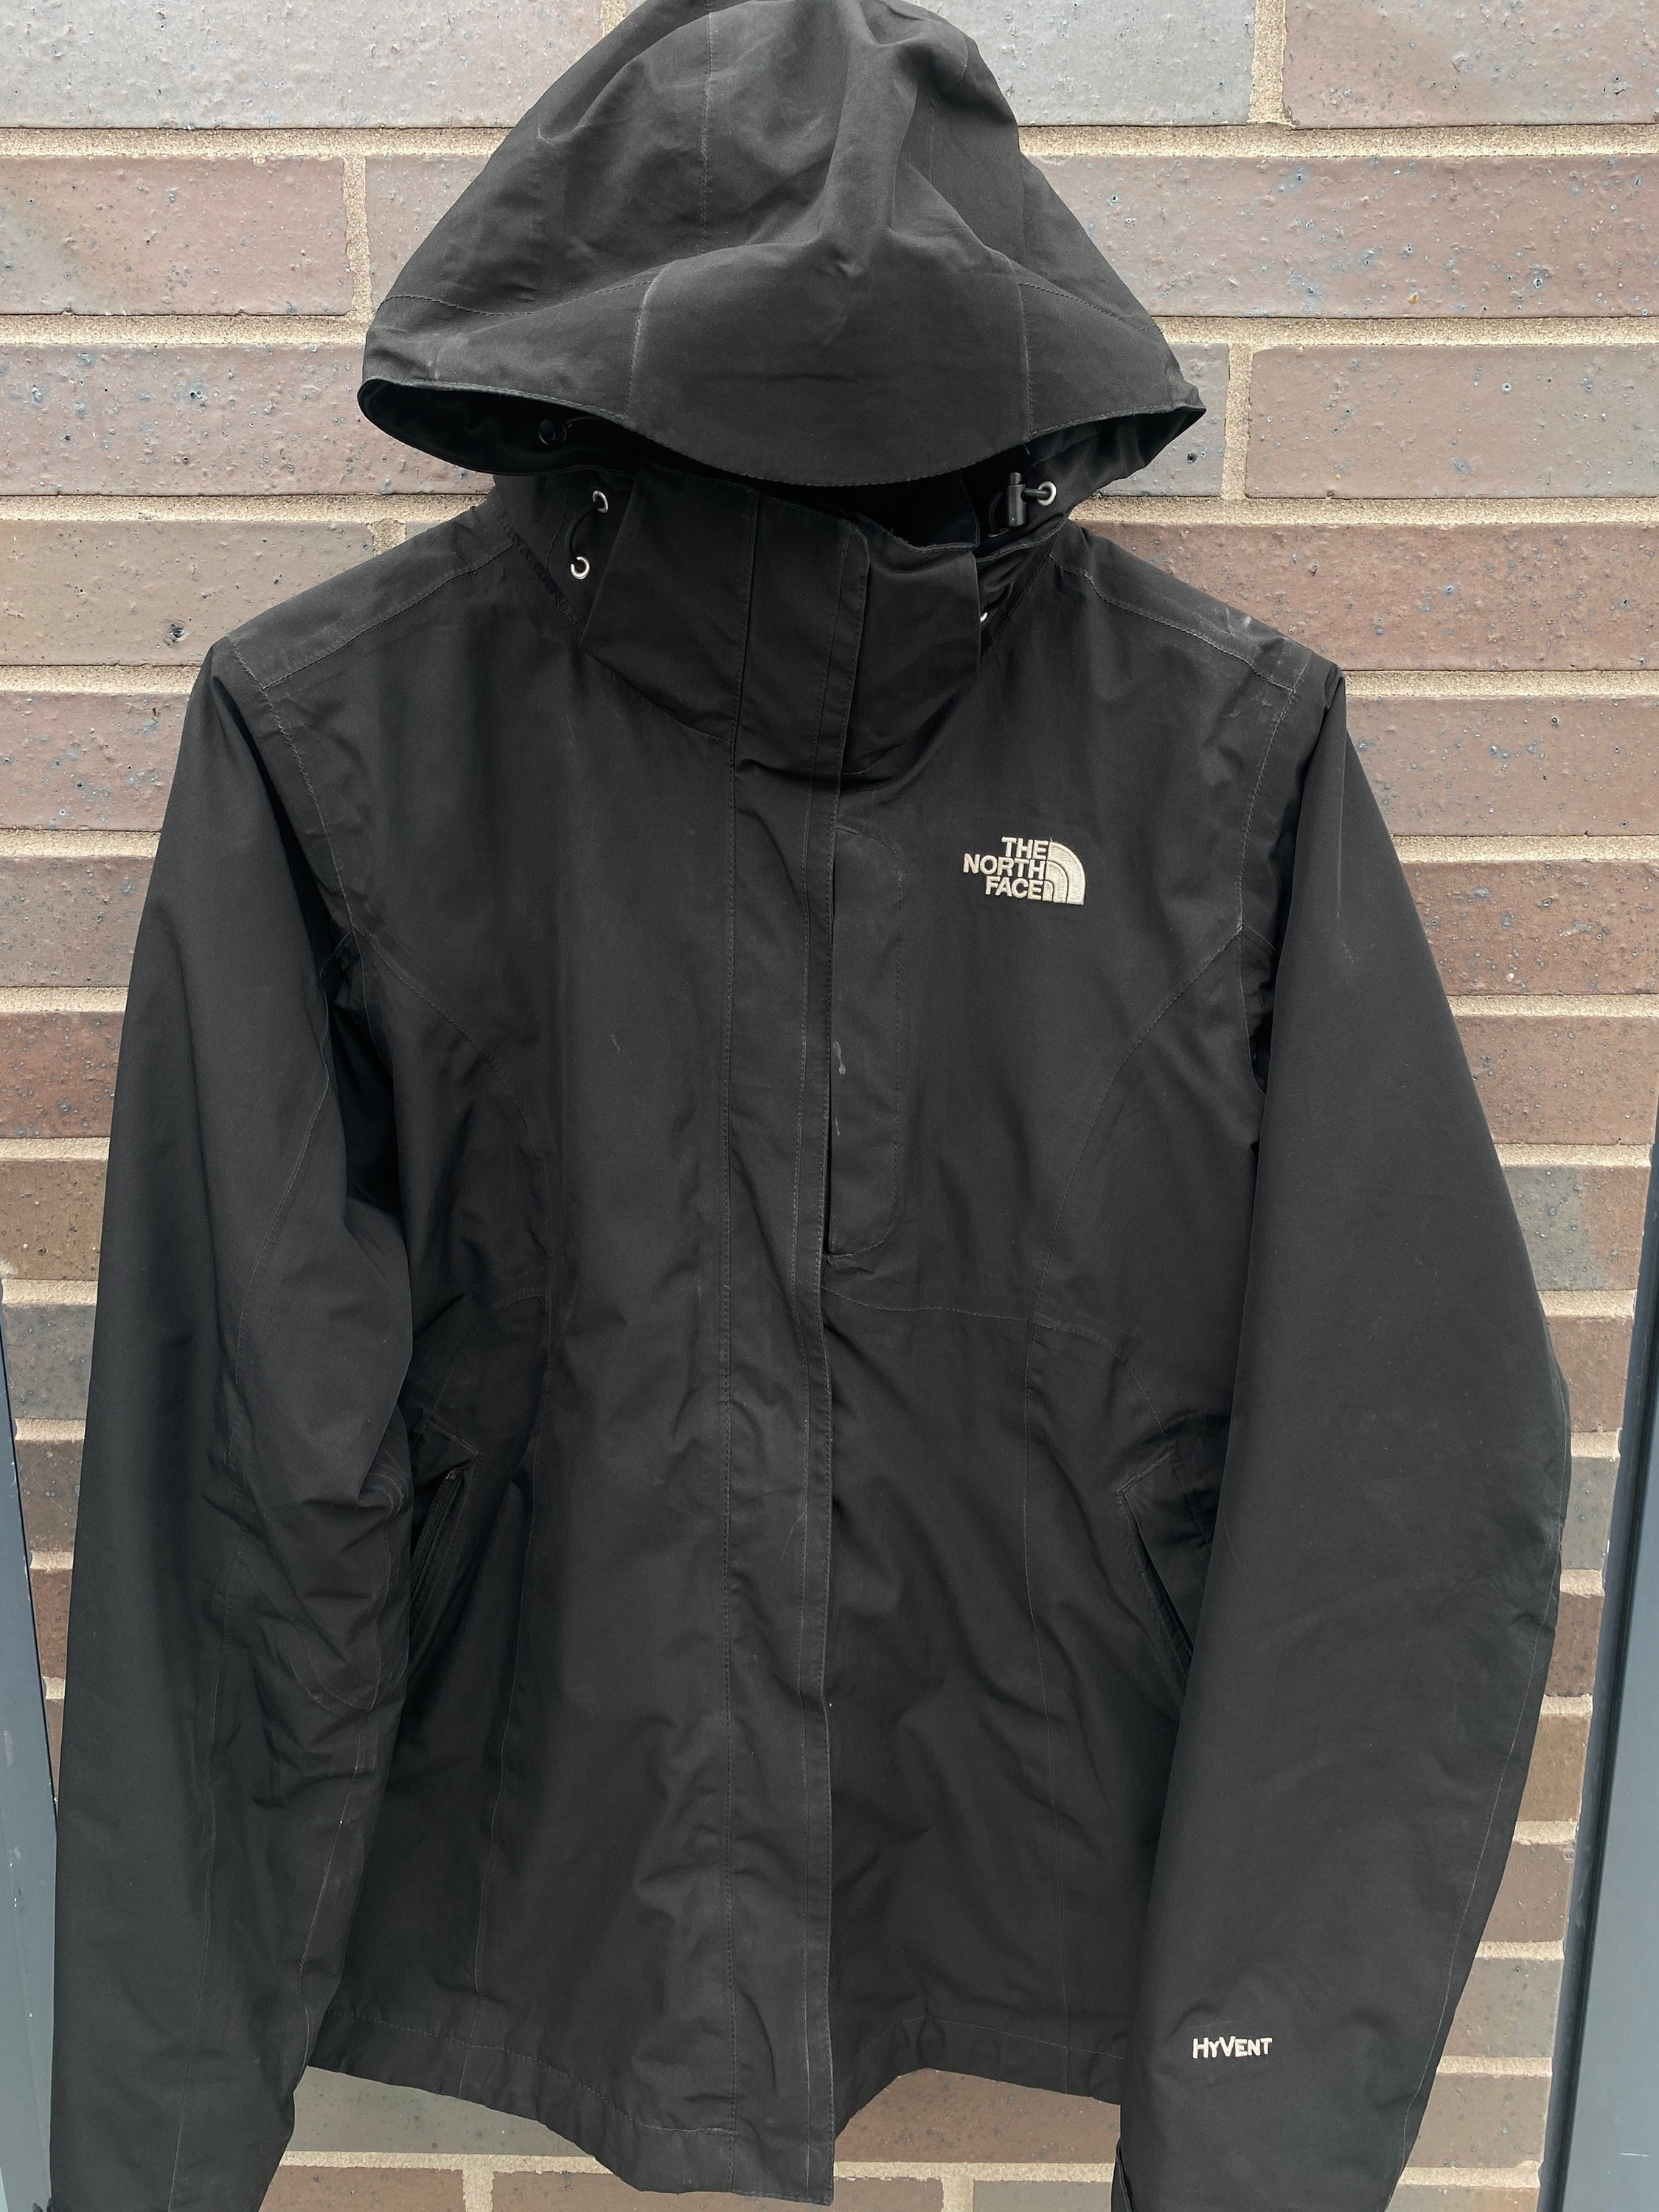 Vintage 90s the North Face Hyvent Jacket / Winter Coat / Vintage North Face  / Winter Jacket / Streetwear / Shell Jacket / North Face Shell 